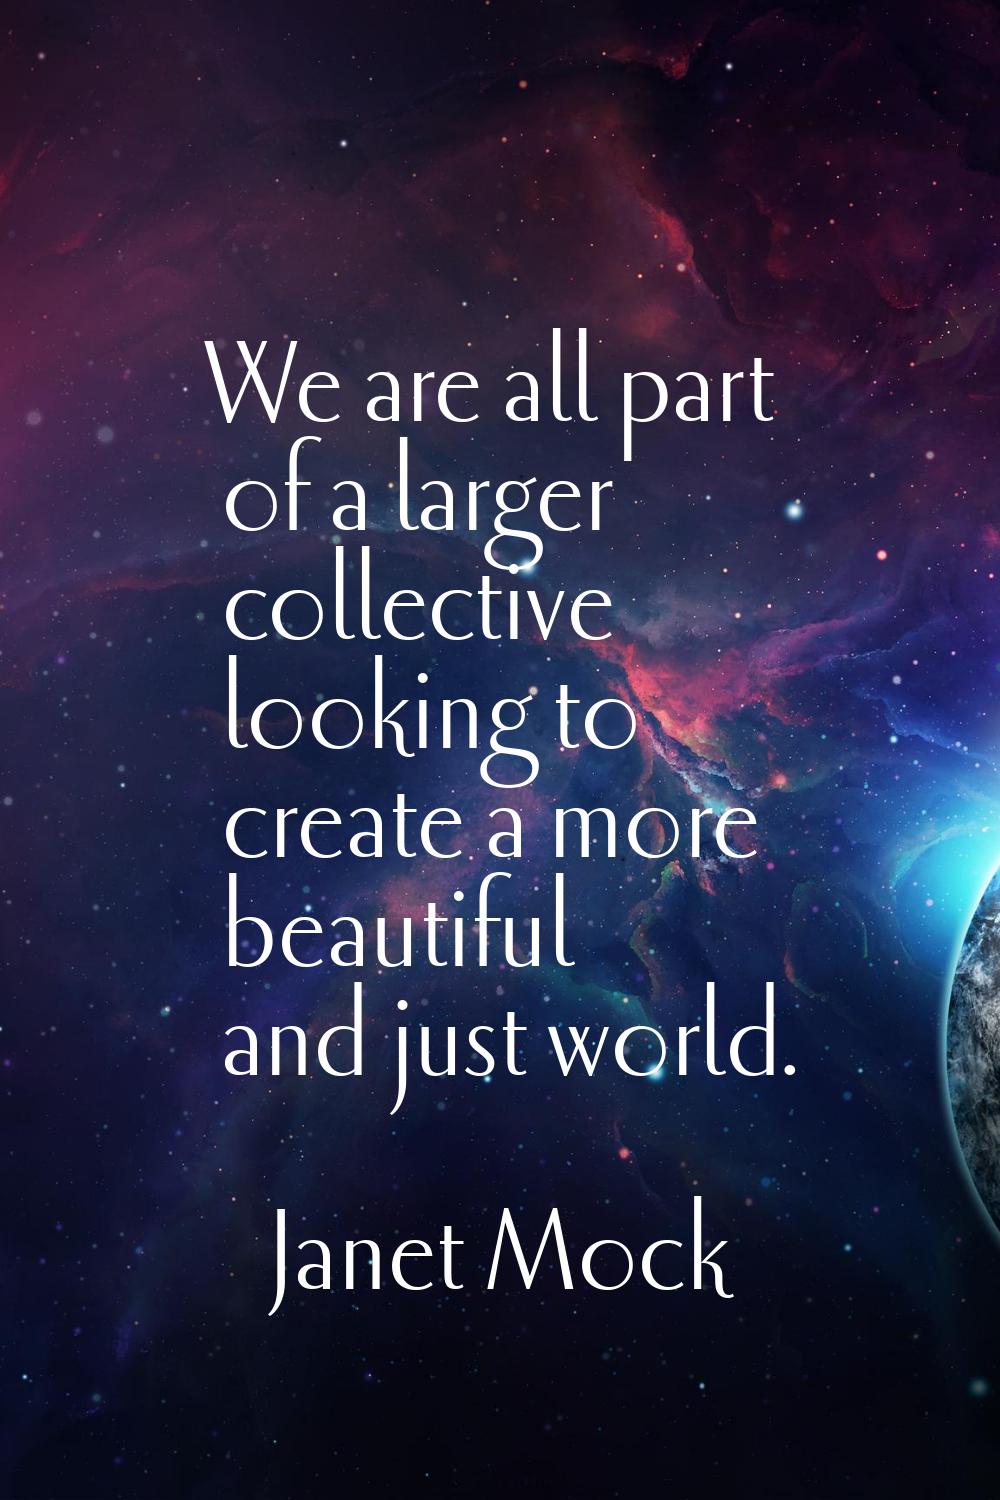 We are all part of a larger collective looking to create a more beautiful and just world.